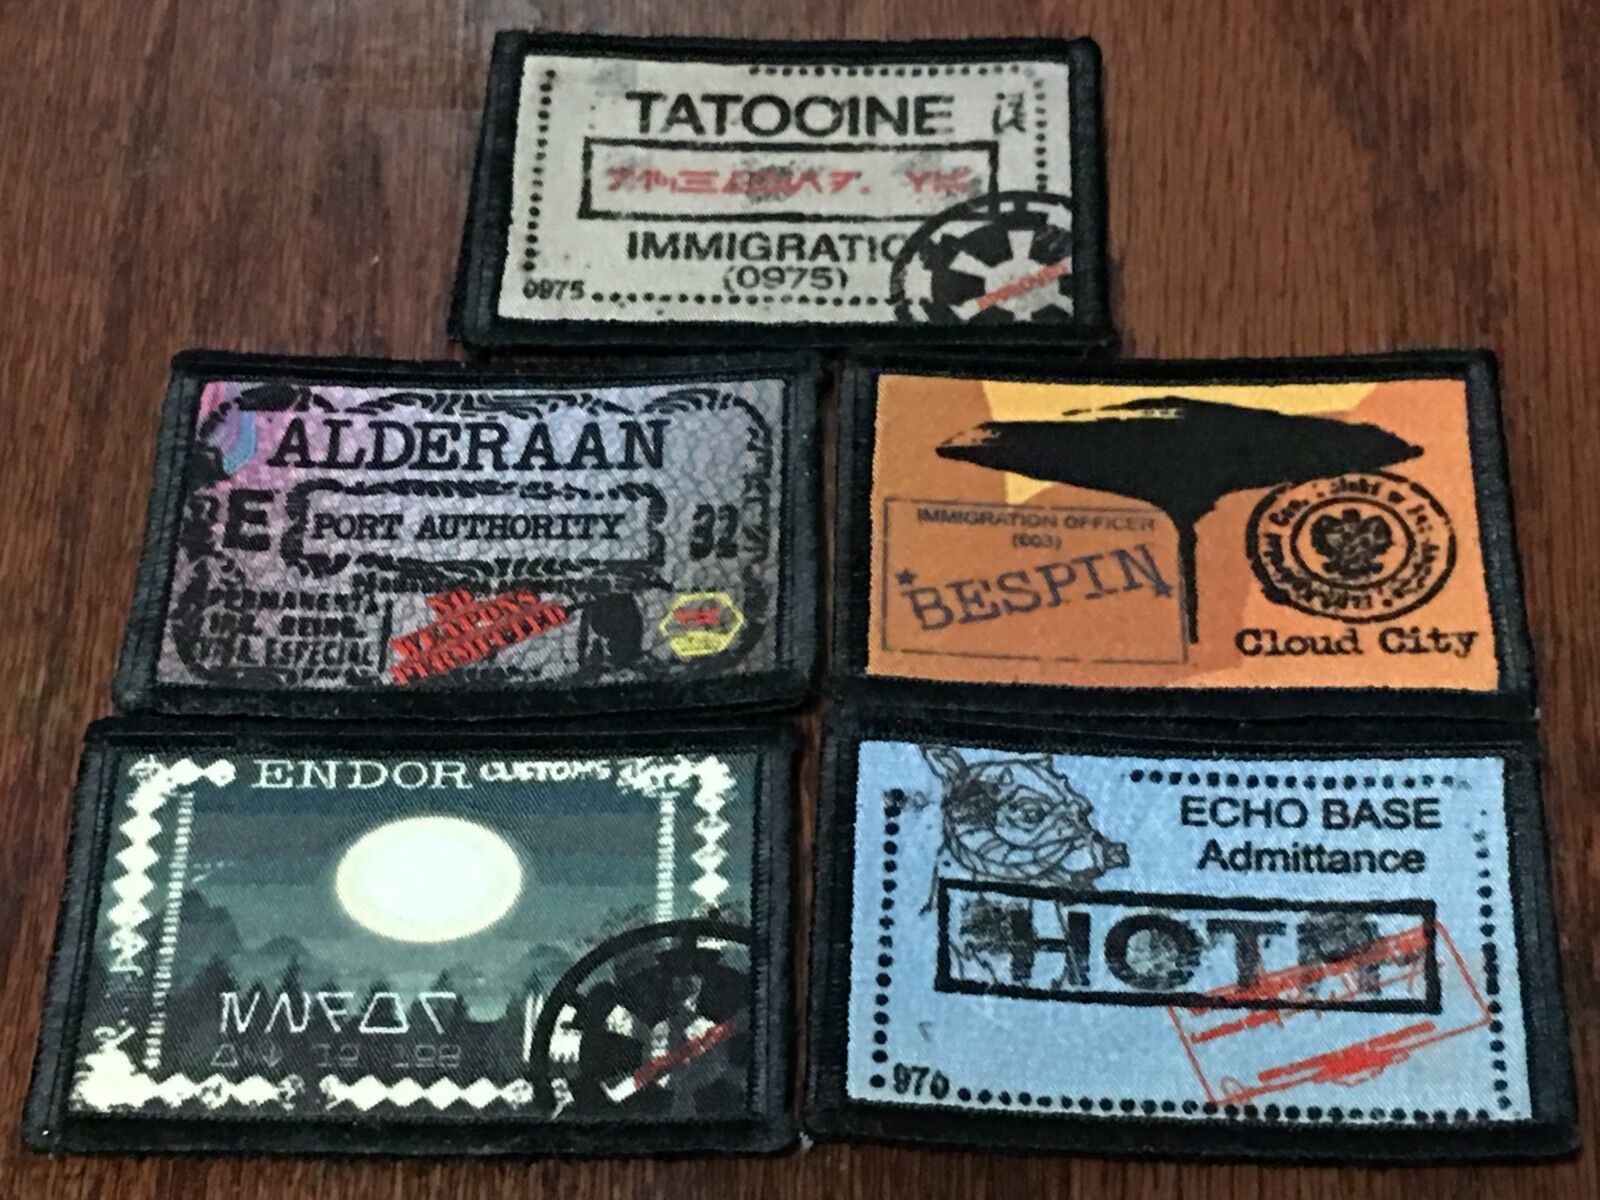 Star Wars Passport Stamp LOT (5 Patches) Morale Patch Military Tactical Army USA